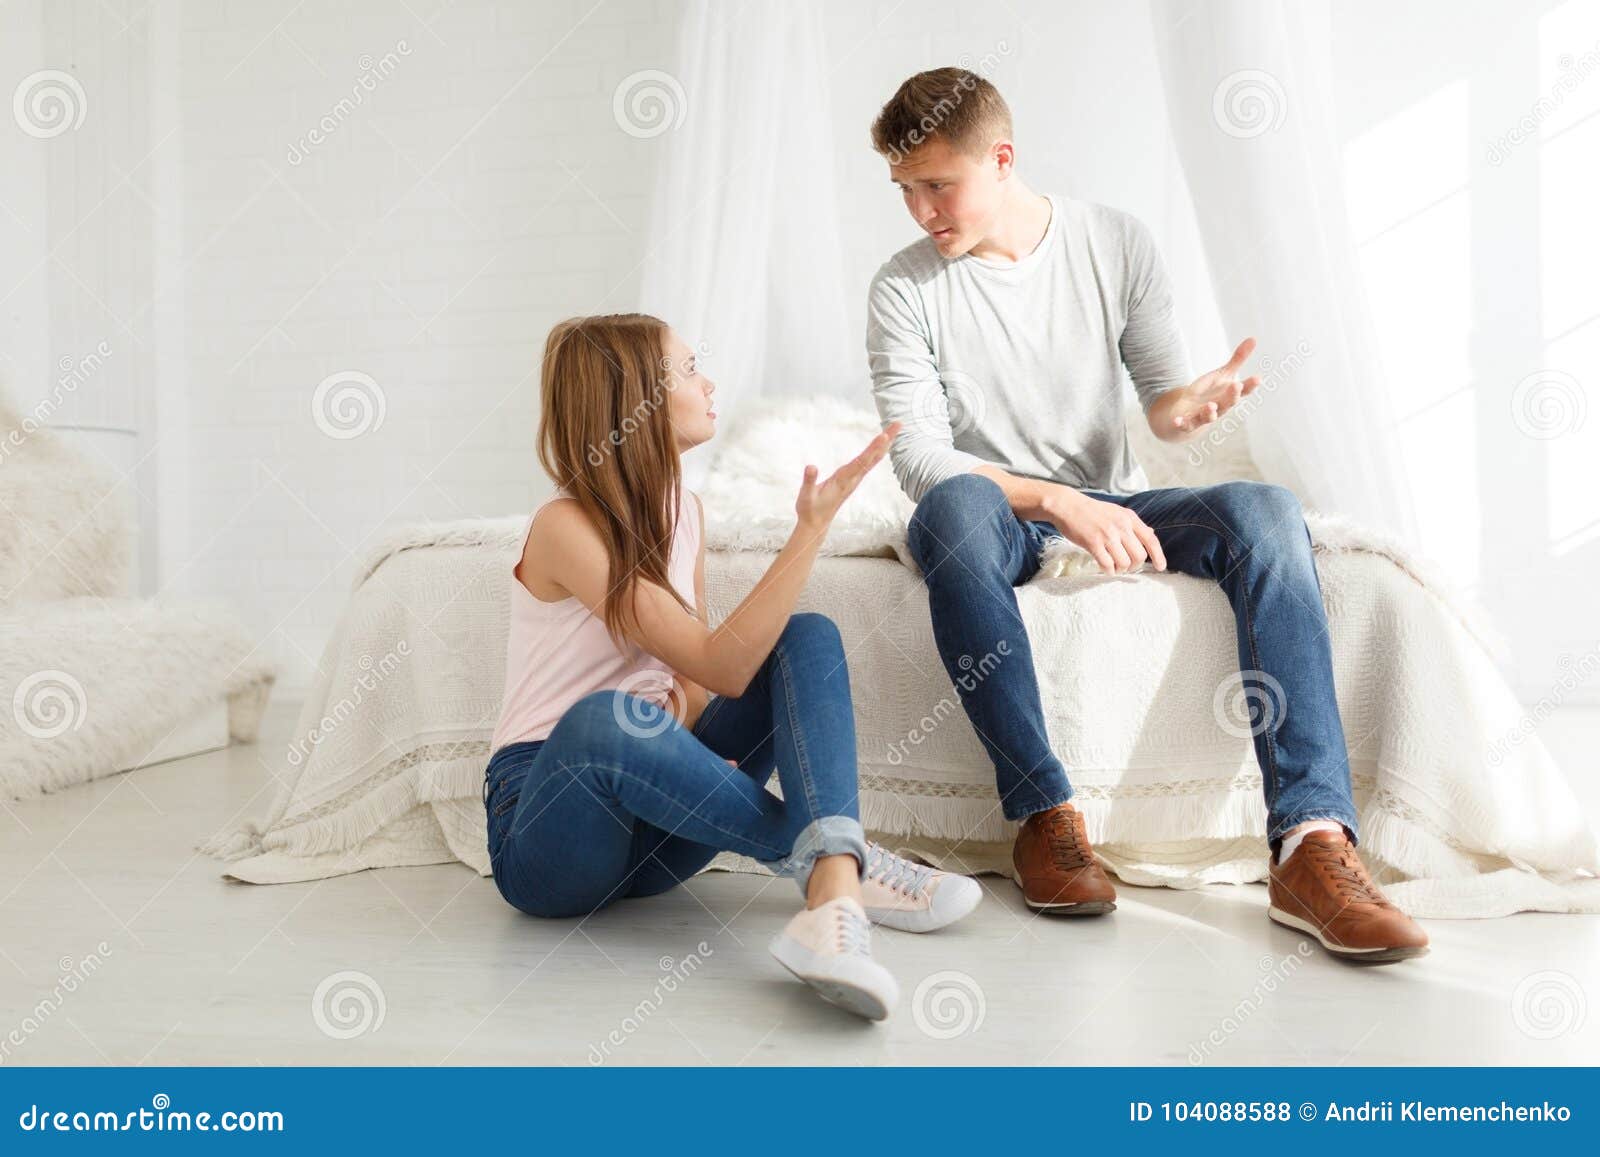 Young Couple Find Out The Relationship In The Bedroom Indoors Bedroom